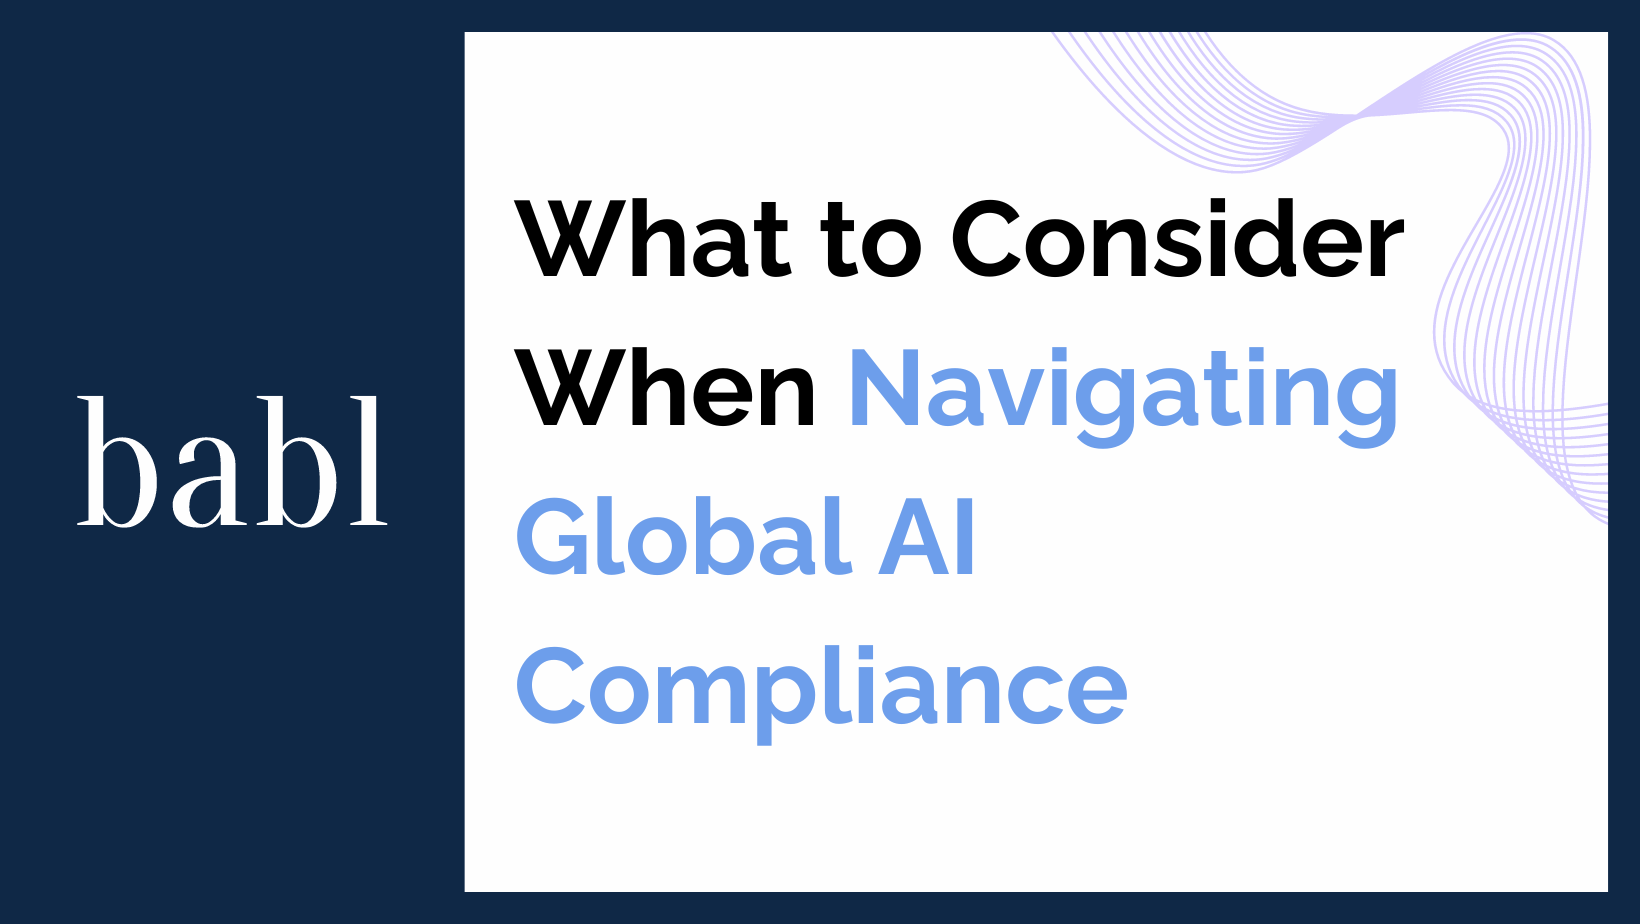 What to Consider when Navigating Global AI Compliance